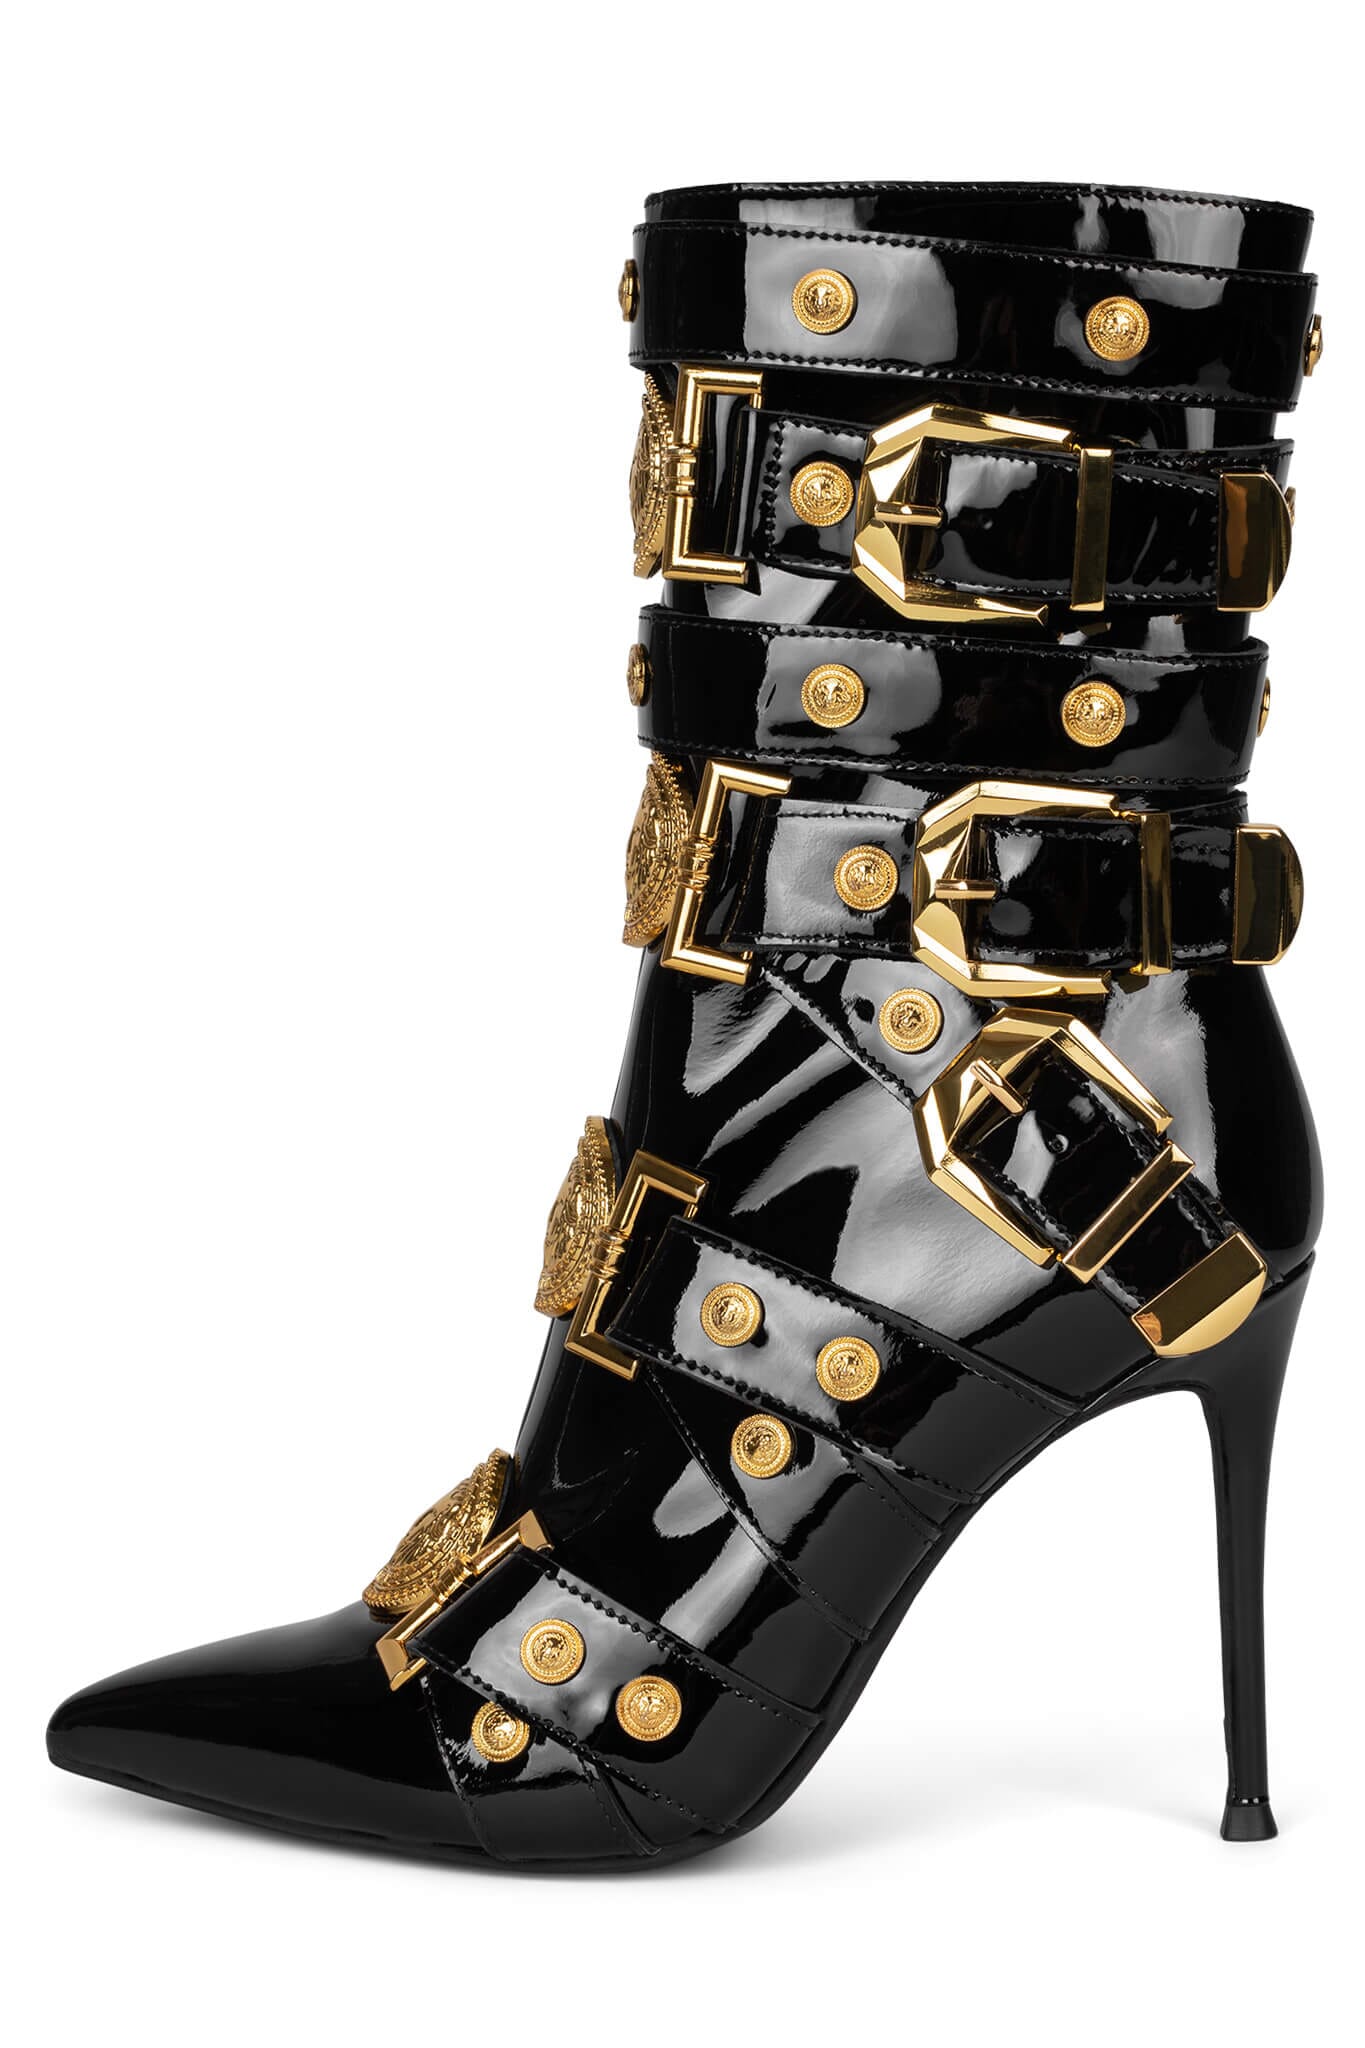 Womens High Heels with Buckle Straps | Buy Womens Shoes